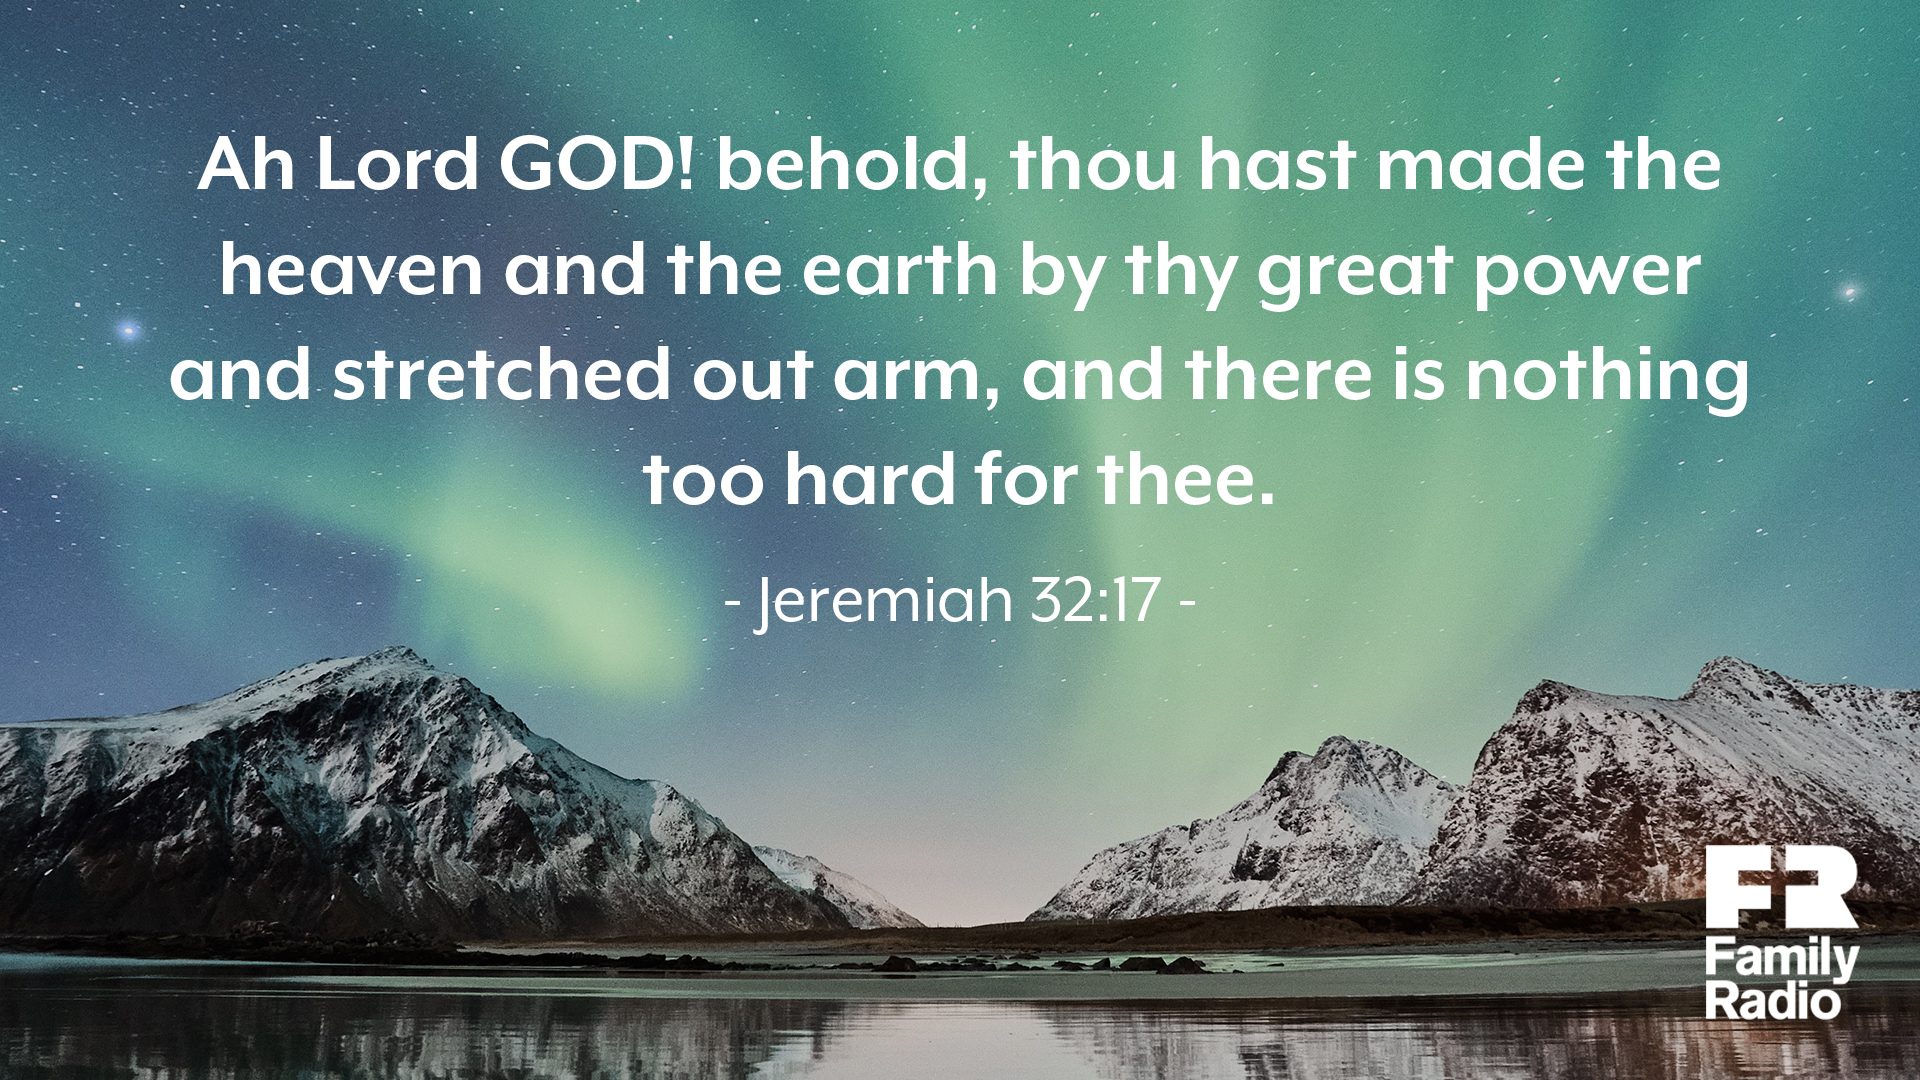 "Ah Lord GOD! behold, thou hast made the heaven and the earth by thy great power and stretched out arm, and there is nothing too hard for thee."